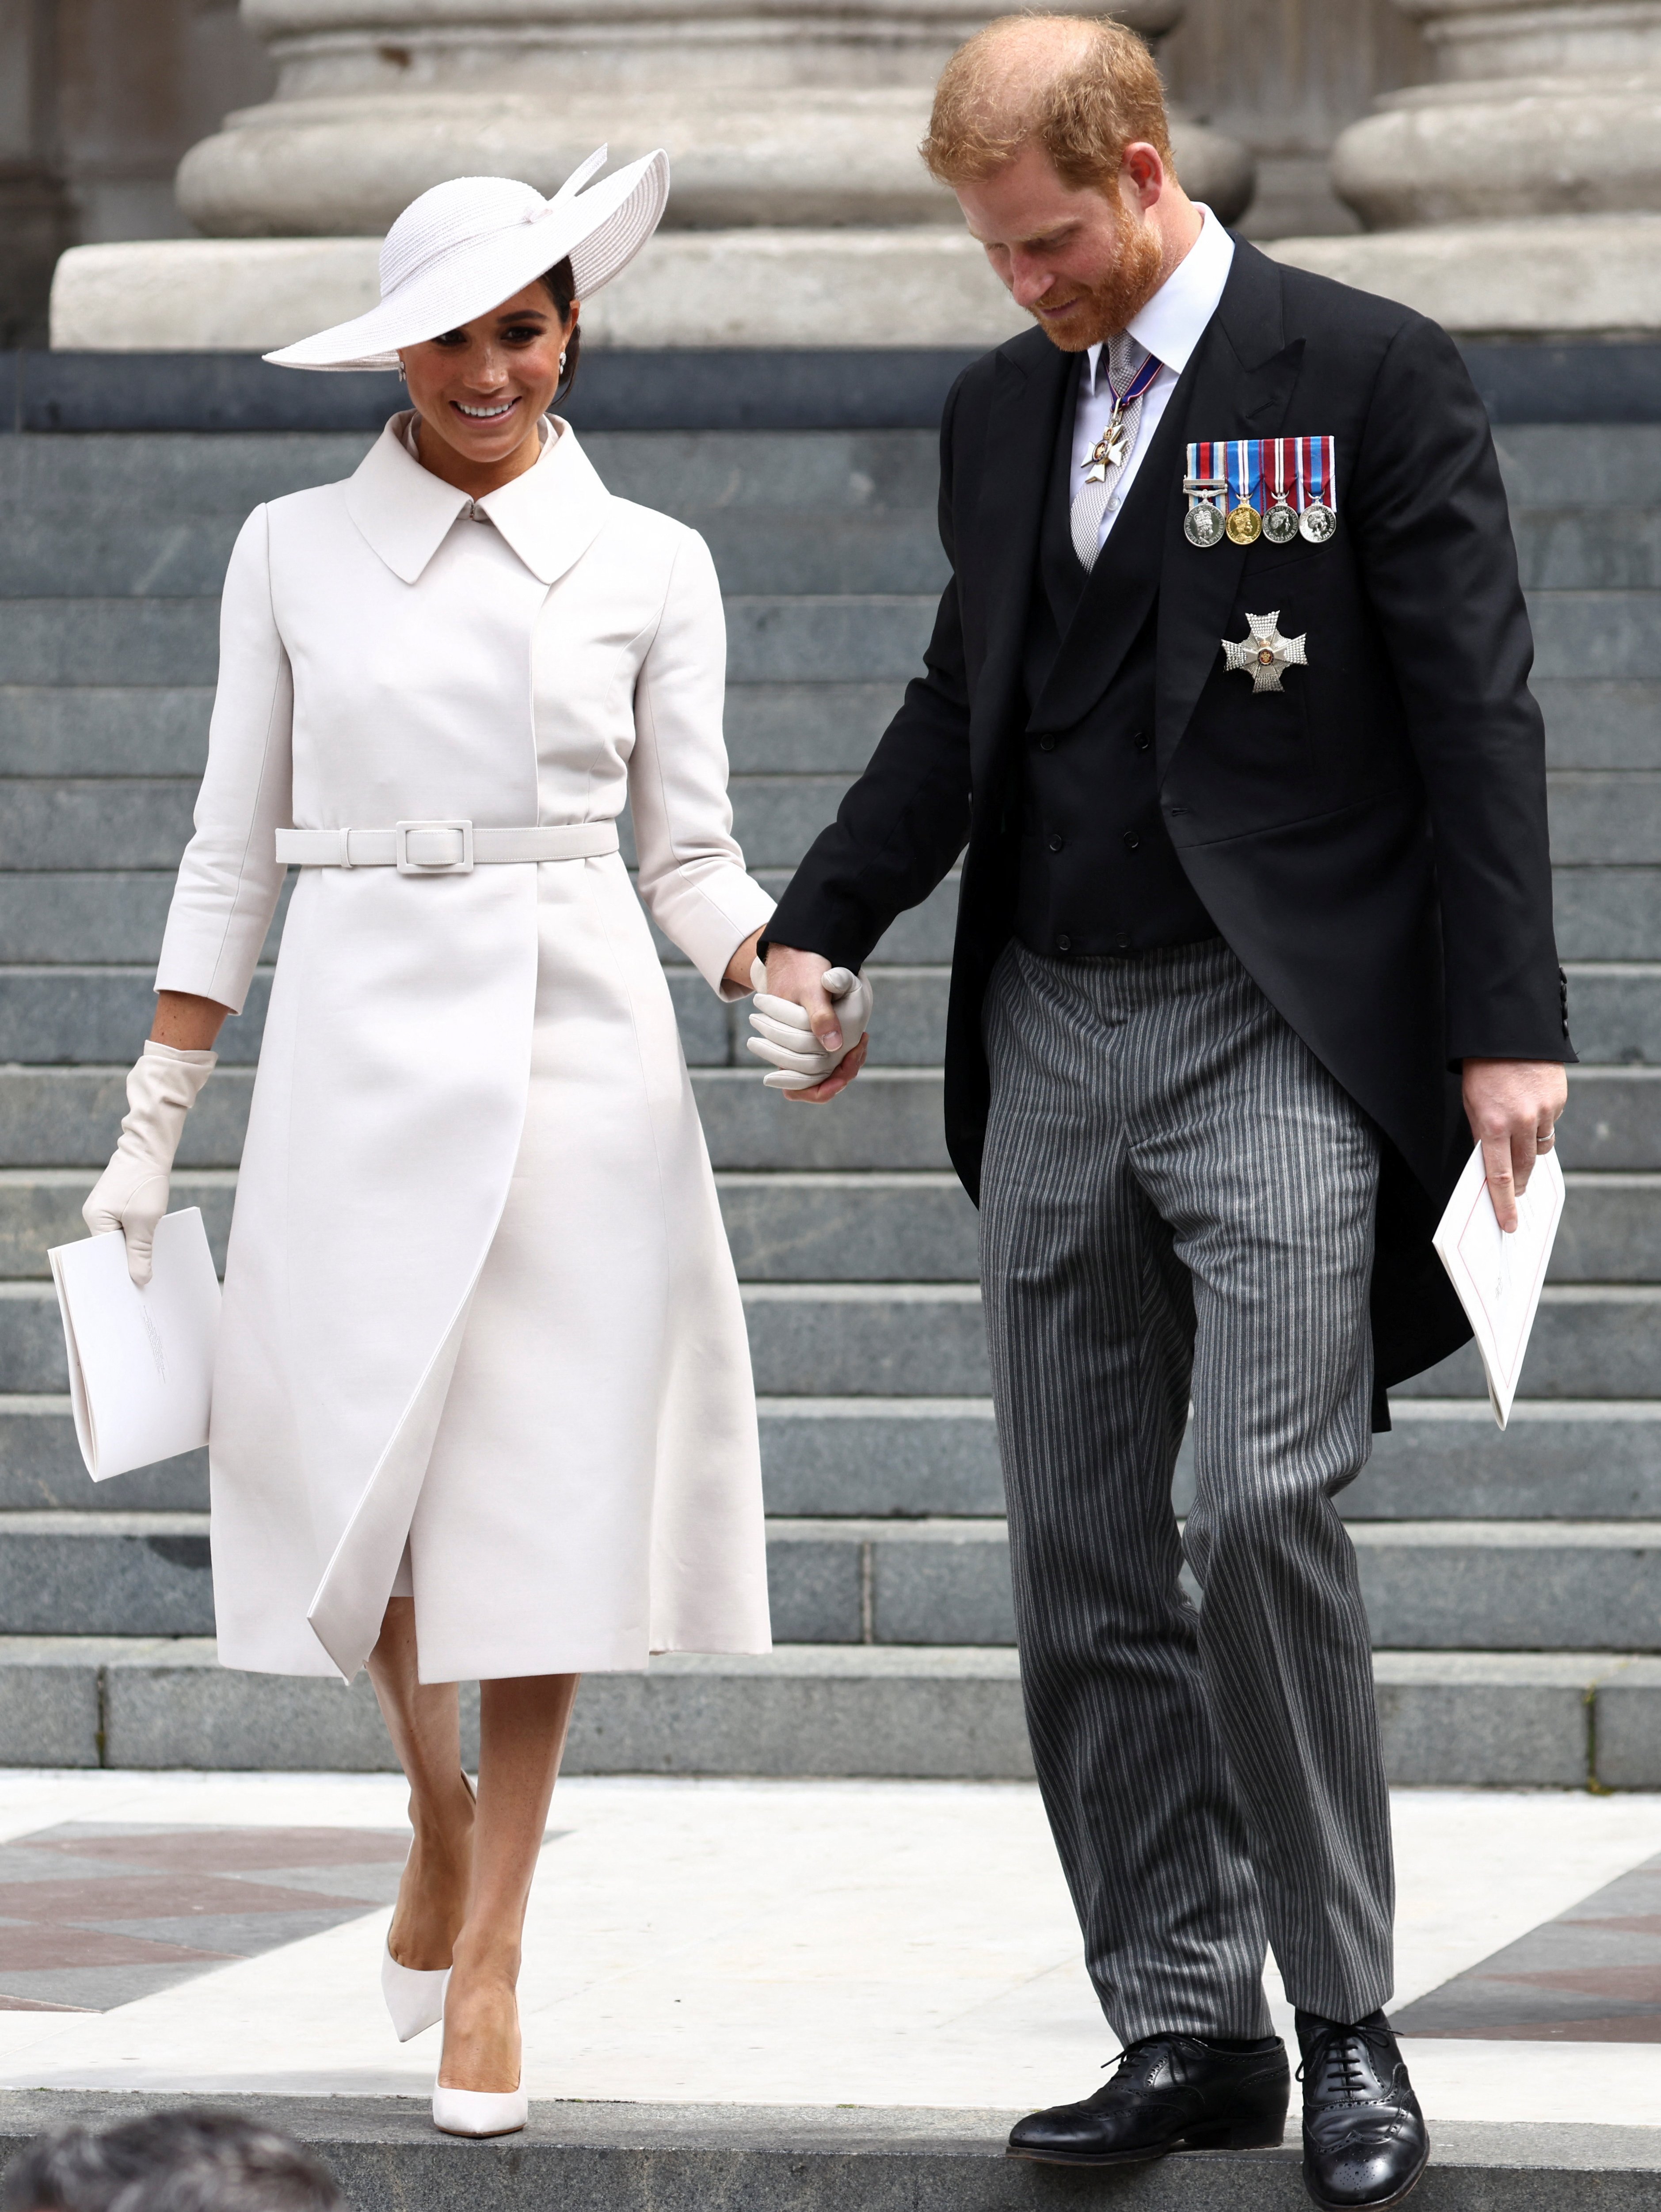 Prince Harryand Meghan after the National Service of Thanksgiving to Celebrate the Platinum Jubilee of Her Majesty The Queen at St Paul's Cathedral on June 3, 2022 in London, England. | Source: Getty Images